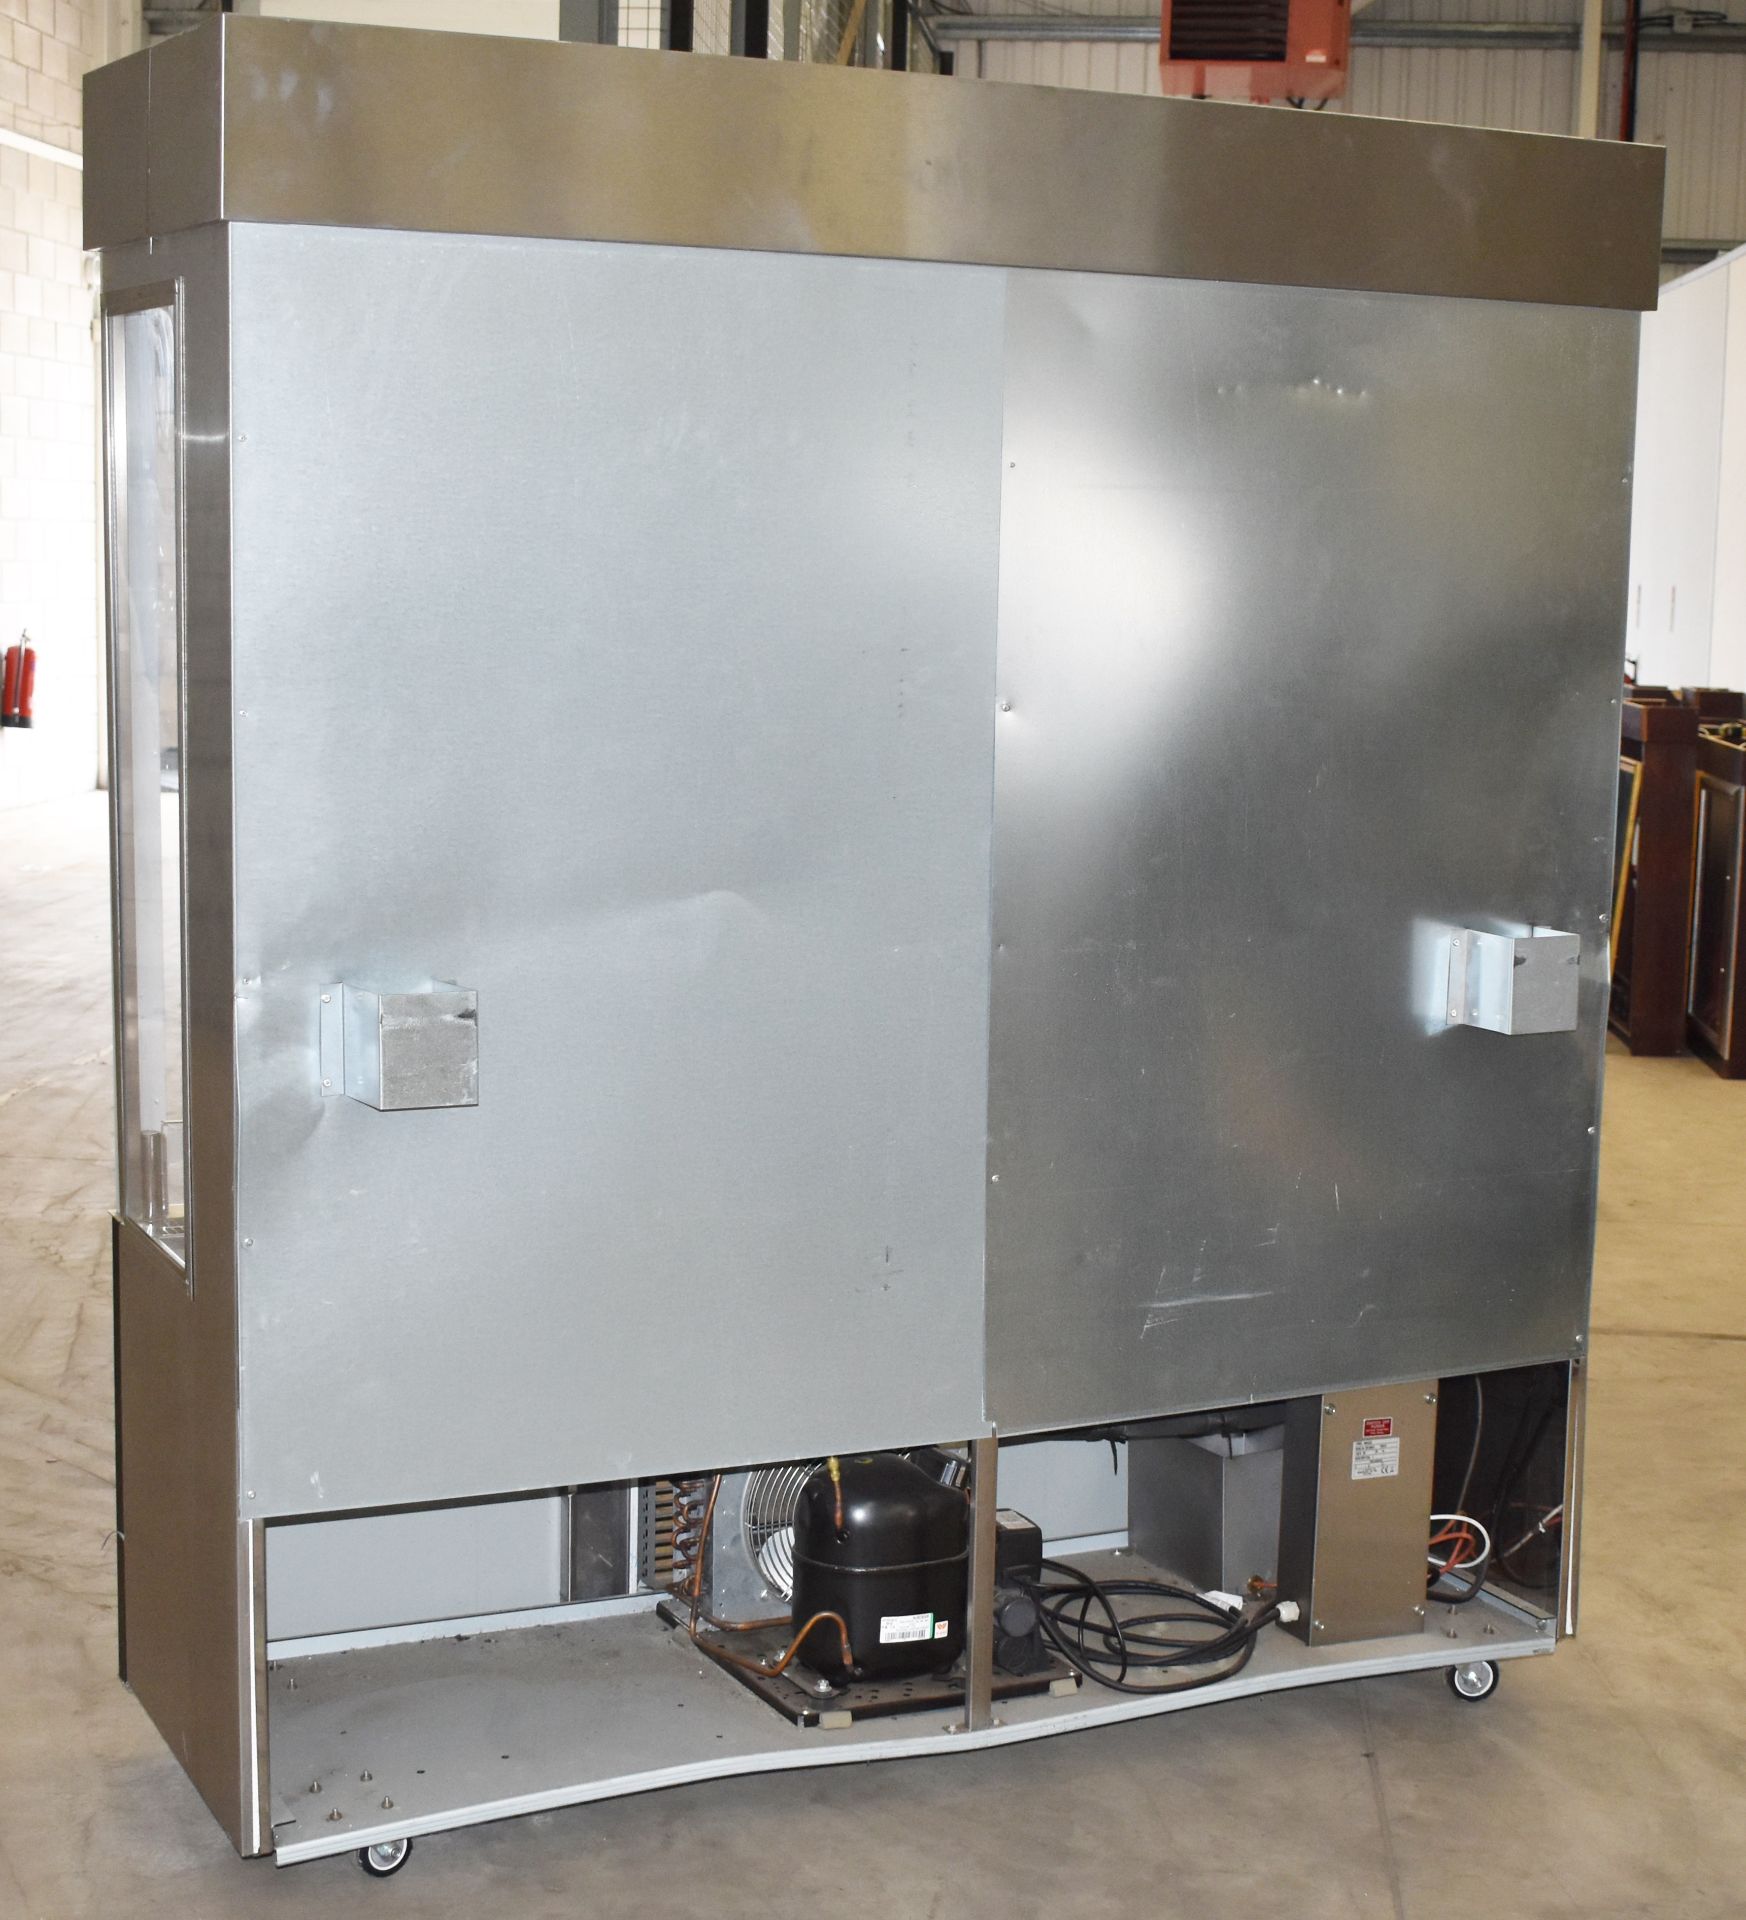 1 x Moffat Chilled Merchandiser With Lockable Roller Shutter - Includes Key - Model MM18LSA - - Image 3 of 8